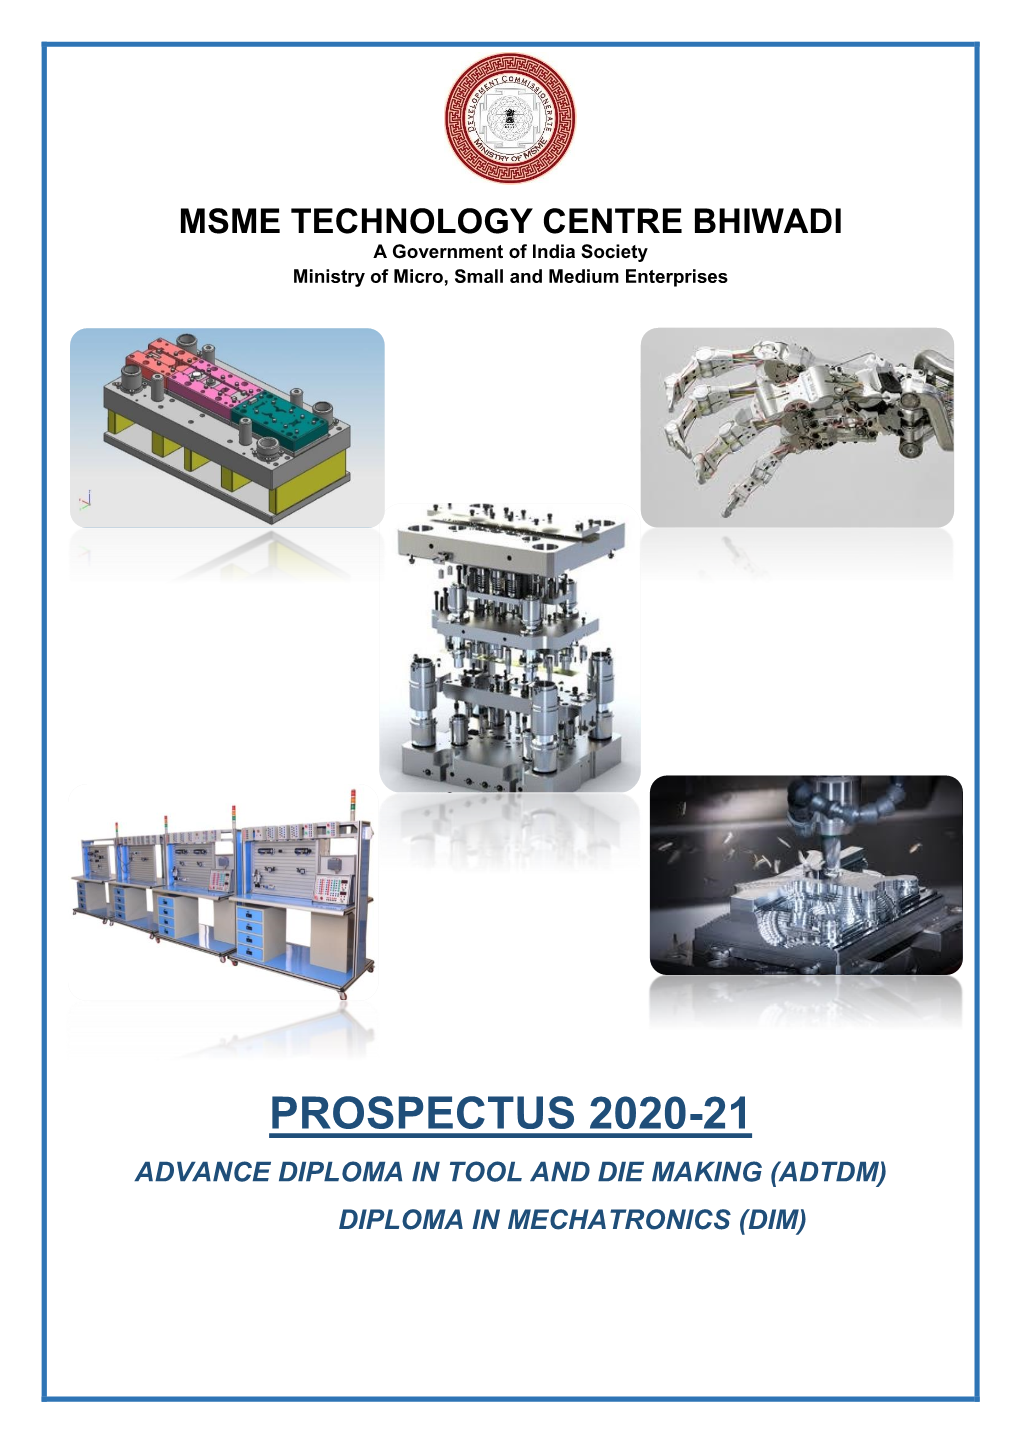 Prospectus 2020-21 Advance Diploma in Tool and Die Making (Adtdm) Diploma in Mechatronics (Dim)